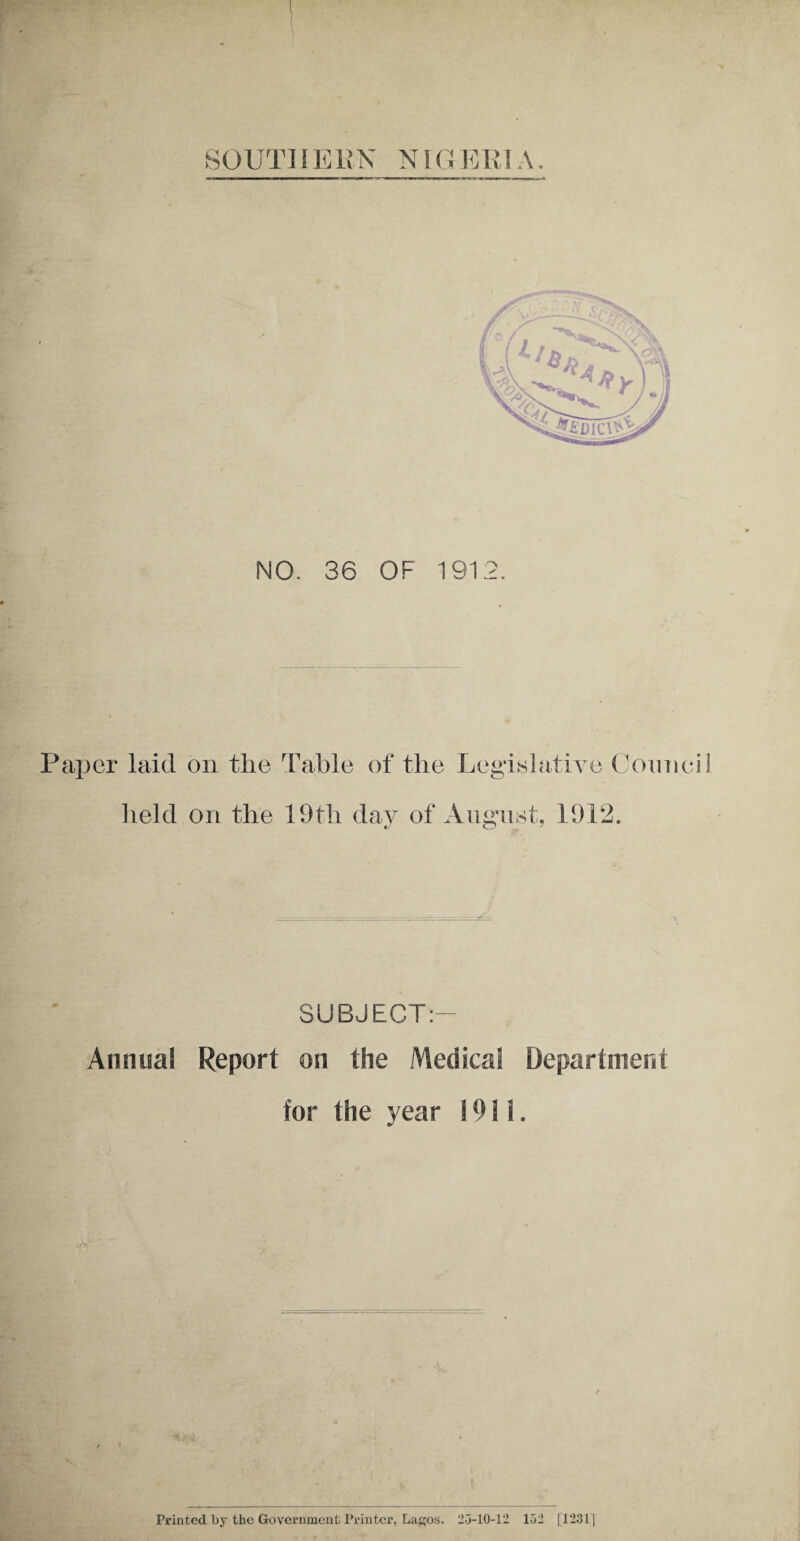 NO. 36 OF 1912. Paper laid on t-lie Table of the Legislative Council held on the 19th day of August, 1912. SUBJECT:- Annual Report on the Medical Department for the year 1911.